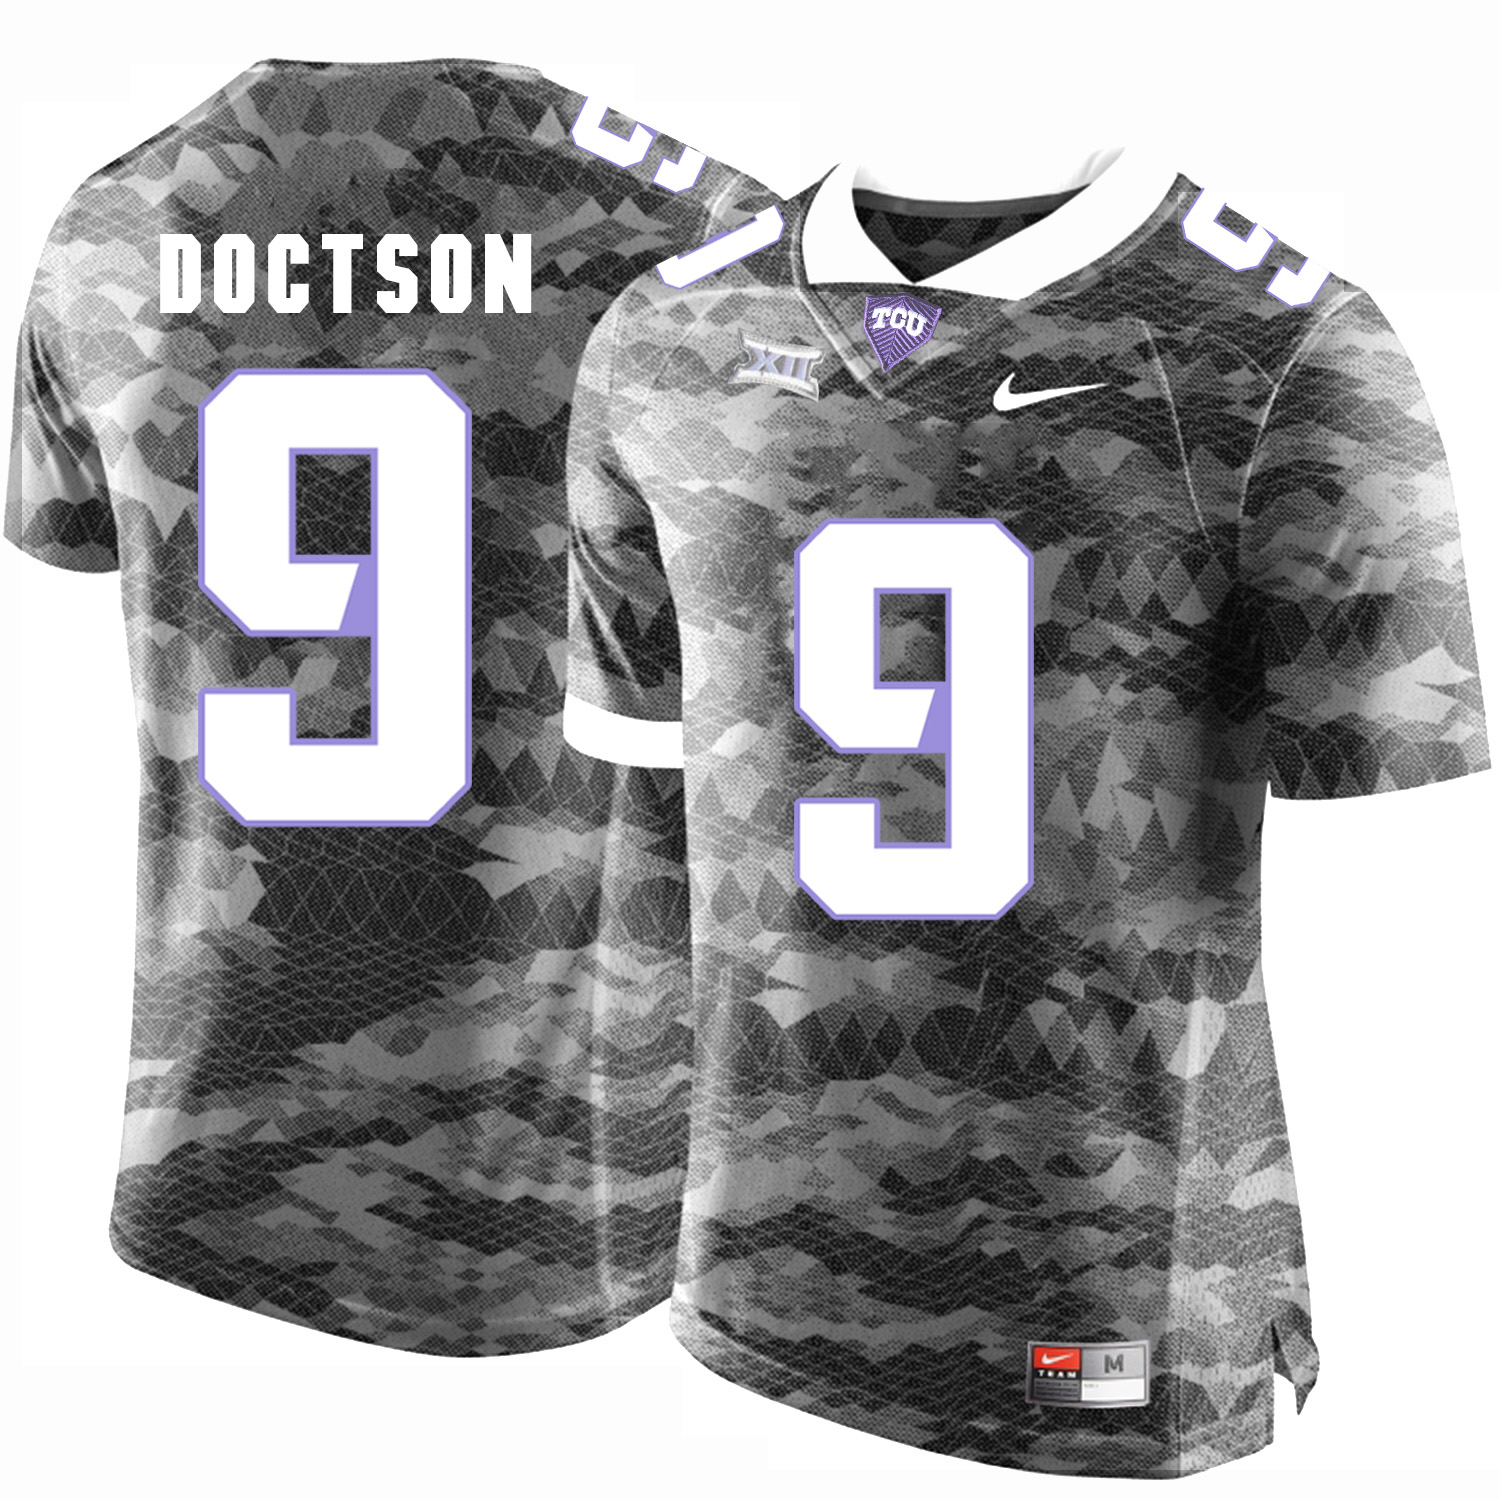 TCU Horned Frogs 9 Josh Doctson Gray College Football Limited Jersey